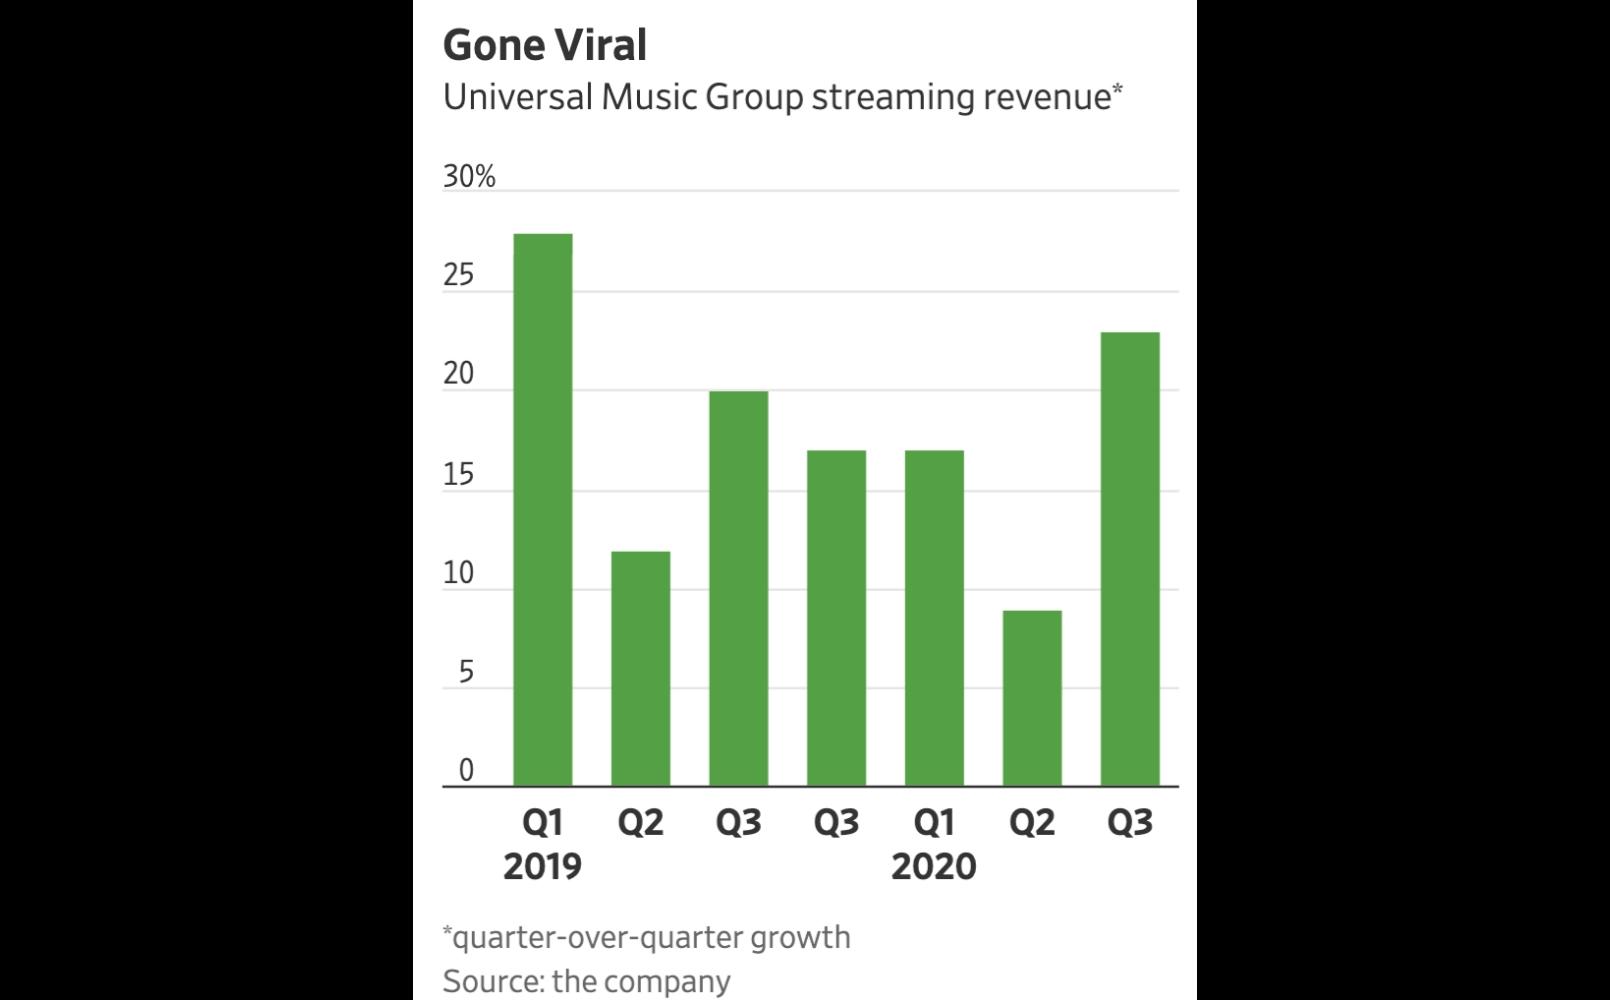 Universal Music Group streaming revenue